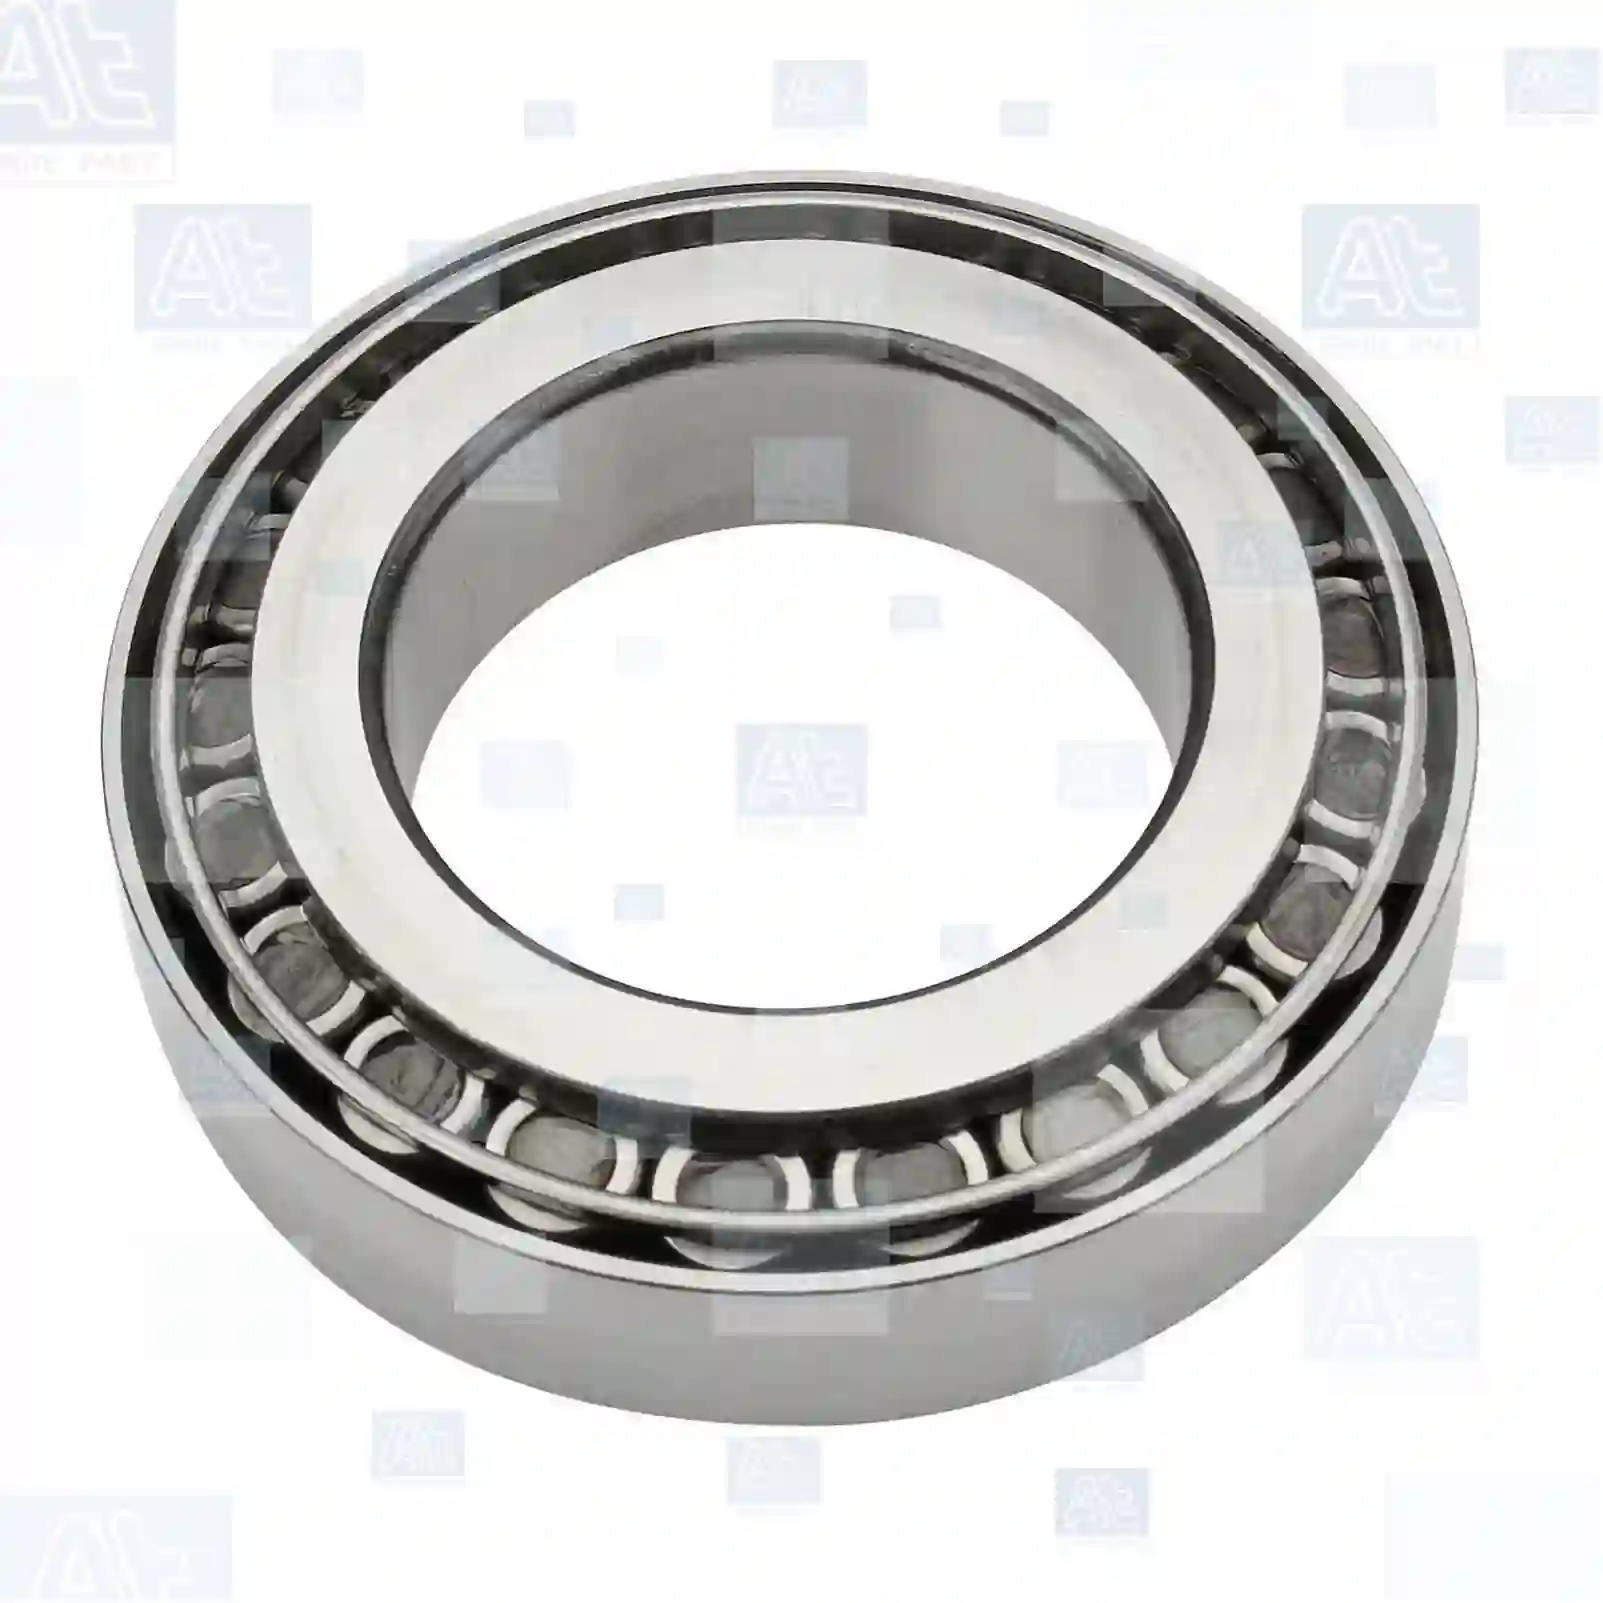 Tapered roller bearing, at no 77725217, oem no: 000337133, 01103771, 94036574, 94057672, 94060942, 988475101, 988475101A, 1-09812044-0, 1-09812053-0, 1-09812153-0, 1-09812154-0, 1-09812168-0, 1-09812244-0, 9-00093161-0, 01103771, 1103771, 26800210, 06324901400, 06324990005, 06324990200, 81934206096, 87523301010, A0023432215, A0773221500, 996032215, 0009817405, 0009818405, 0019814805, 3279810305, 9429810205, MH043001, 01014-10584, 0023432215, 0773221500, 0959232215, 5000588934, 14102, 177893, 97699-32215, 11066, 2V5609747Q At Spare Part | Engine, Accelerator Pedal, Camshaft, Connecting Rod, Crankcase, Crankshaft, Cylinder Head, Engine Suspension Mountings, Exhaust Manifold, Exhaust Gas Recirculation, Filter Kits, Flywheel Housing, General Overhaul Kits, Engine, Intake Manifold, Oil Cleaner, Oil Cooler, Oil Filter, Oil Pump, Oil Sump, Piston & Liner, Sensor & Switch, Timing Case, Turbocharger, Cooling System, Belt Tensioner, Coolant Filter, Coolant Pipe, Corrosion Prevention Agent, Drive, Expansion Tank, Fan, Intercooler, Monitors & Gauges, Radiator, Thermostat, V-Belt / Timing belt, Water Pump, Fuel System, Electronical Injector Unit, Feed Pump, Fuel Filter, cpl., Fuel Gauge Sender,  Fuel Line, Fuel Pump, Fuel Tank, Injection Line Kit, Injection Pump, Exhaust System, Clutch & Pedal, Gearbox, Propeller Shaft, Axles, Brake System, Hubs & Wheels, Suspension, Leaf Spring, Universal Parts / Accessories, Steering, Electrical System, Cabin Tapered roller bearing, at no 77725217, oem no: 000337133, 01103771, 94036574, 94057672, 94060942, 988475101, 988475101A, 1-09812044-0, 1-09812053-0, 1-09812153-0, 1-09812154-0, 1-09812168-0, 1-09812244-0, 9-00093161-0, 01103771, 1103771, 26800210, 06324901400, 06324990005, 06324990200, 81934206096, 87523301010, A0023432215, A0773221500, 996032215, 0009817405, 0009818405, 0019814805, 3279810305, 9429810205, MH043001, 01014-10584, 0023432215, 0773221500, 0959232215, 5000588934, 14102, 177893, 97699-32215, 11066, 2V5609747Q At Spare Part | Engine, Accelerator Pedal, Camshaft, Connecting Rod, Crankcase, Crankshaft, Cylinder Head, Engine Suspension Mountings, Exhaust Manifold, Exhaust Gas Recirculation, Filter Kits, Flywheel Housing, General Overhaul Kits, Engine, Intake Manifold, Oil Cleaner, Oil Cooler, Oil Filter, Oil Pump, Oil Sump, Piston & Liner, Sensor & Switch, Timing Case, Turbocharger, Cooling System, Belt Tensioner, Coolant Filter, Coolant Pipe, Corrosion Prevention Agent, Drive, Expansion Tank, Fan, Intercooler, Monitors & Gauges, Radiator, Thermostat, V-Belt / Timing belt, Water Pump, Fuel System, Electronical Injector Unit, Feed Pump, Fuel Filter, cpl., Fuel Gauge Sender,  Fuel Line, Fuel Pump, Fuel Tank, Injection Line Kit, Injection Pump, Exhaust System, Clutch & Pedal, Gearbox, Propeller Shaft, Axles, Brake System, Hubs & Wheels, Suspension, Leaf Spring, Universal Parts / Accessories, Steering, Electrical System, Cabin